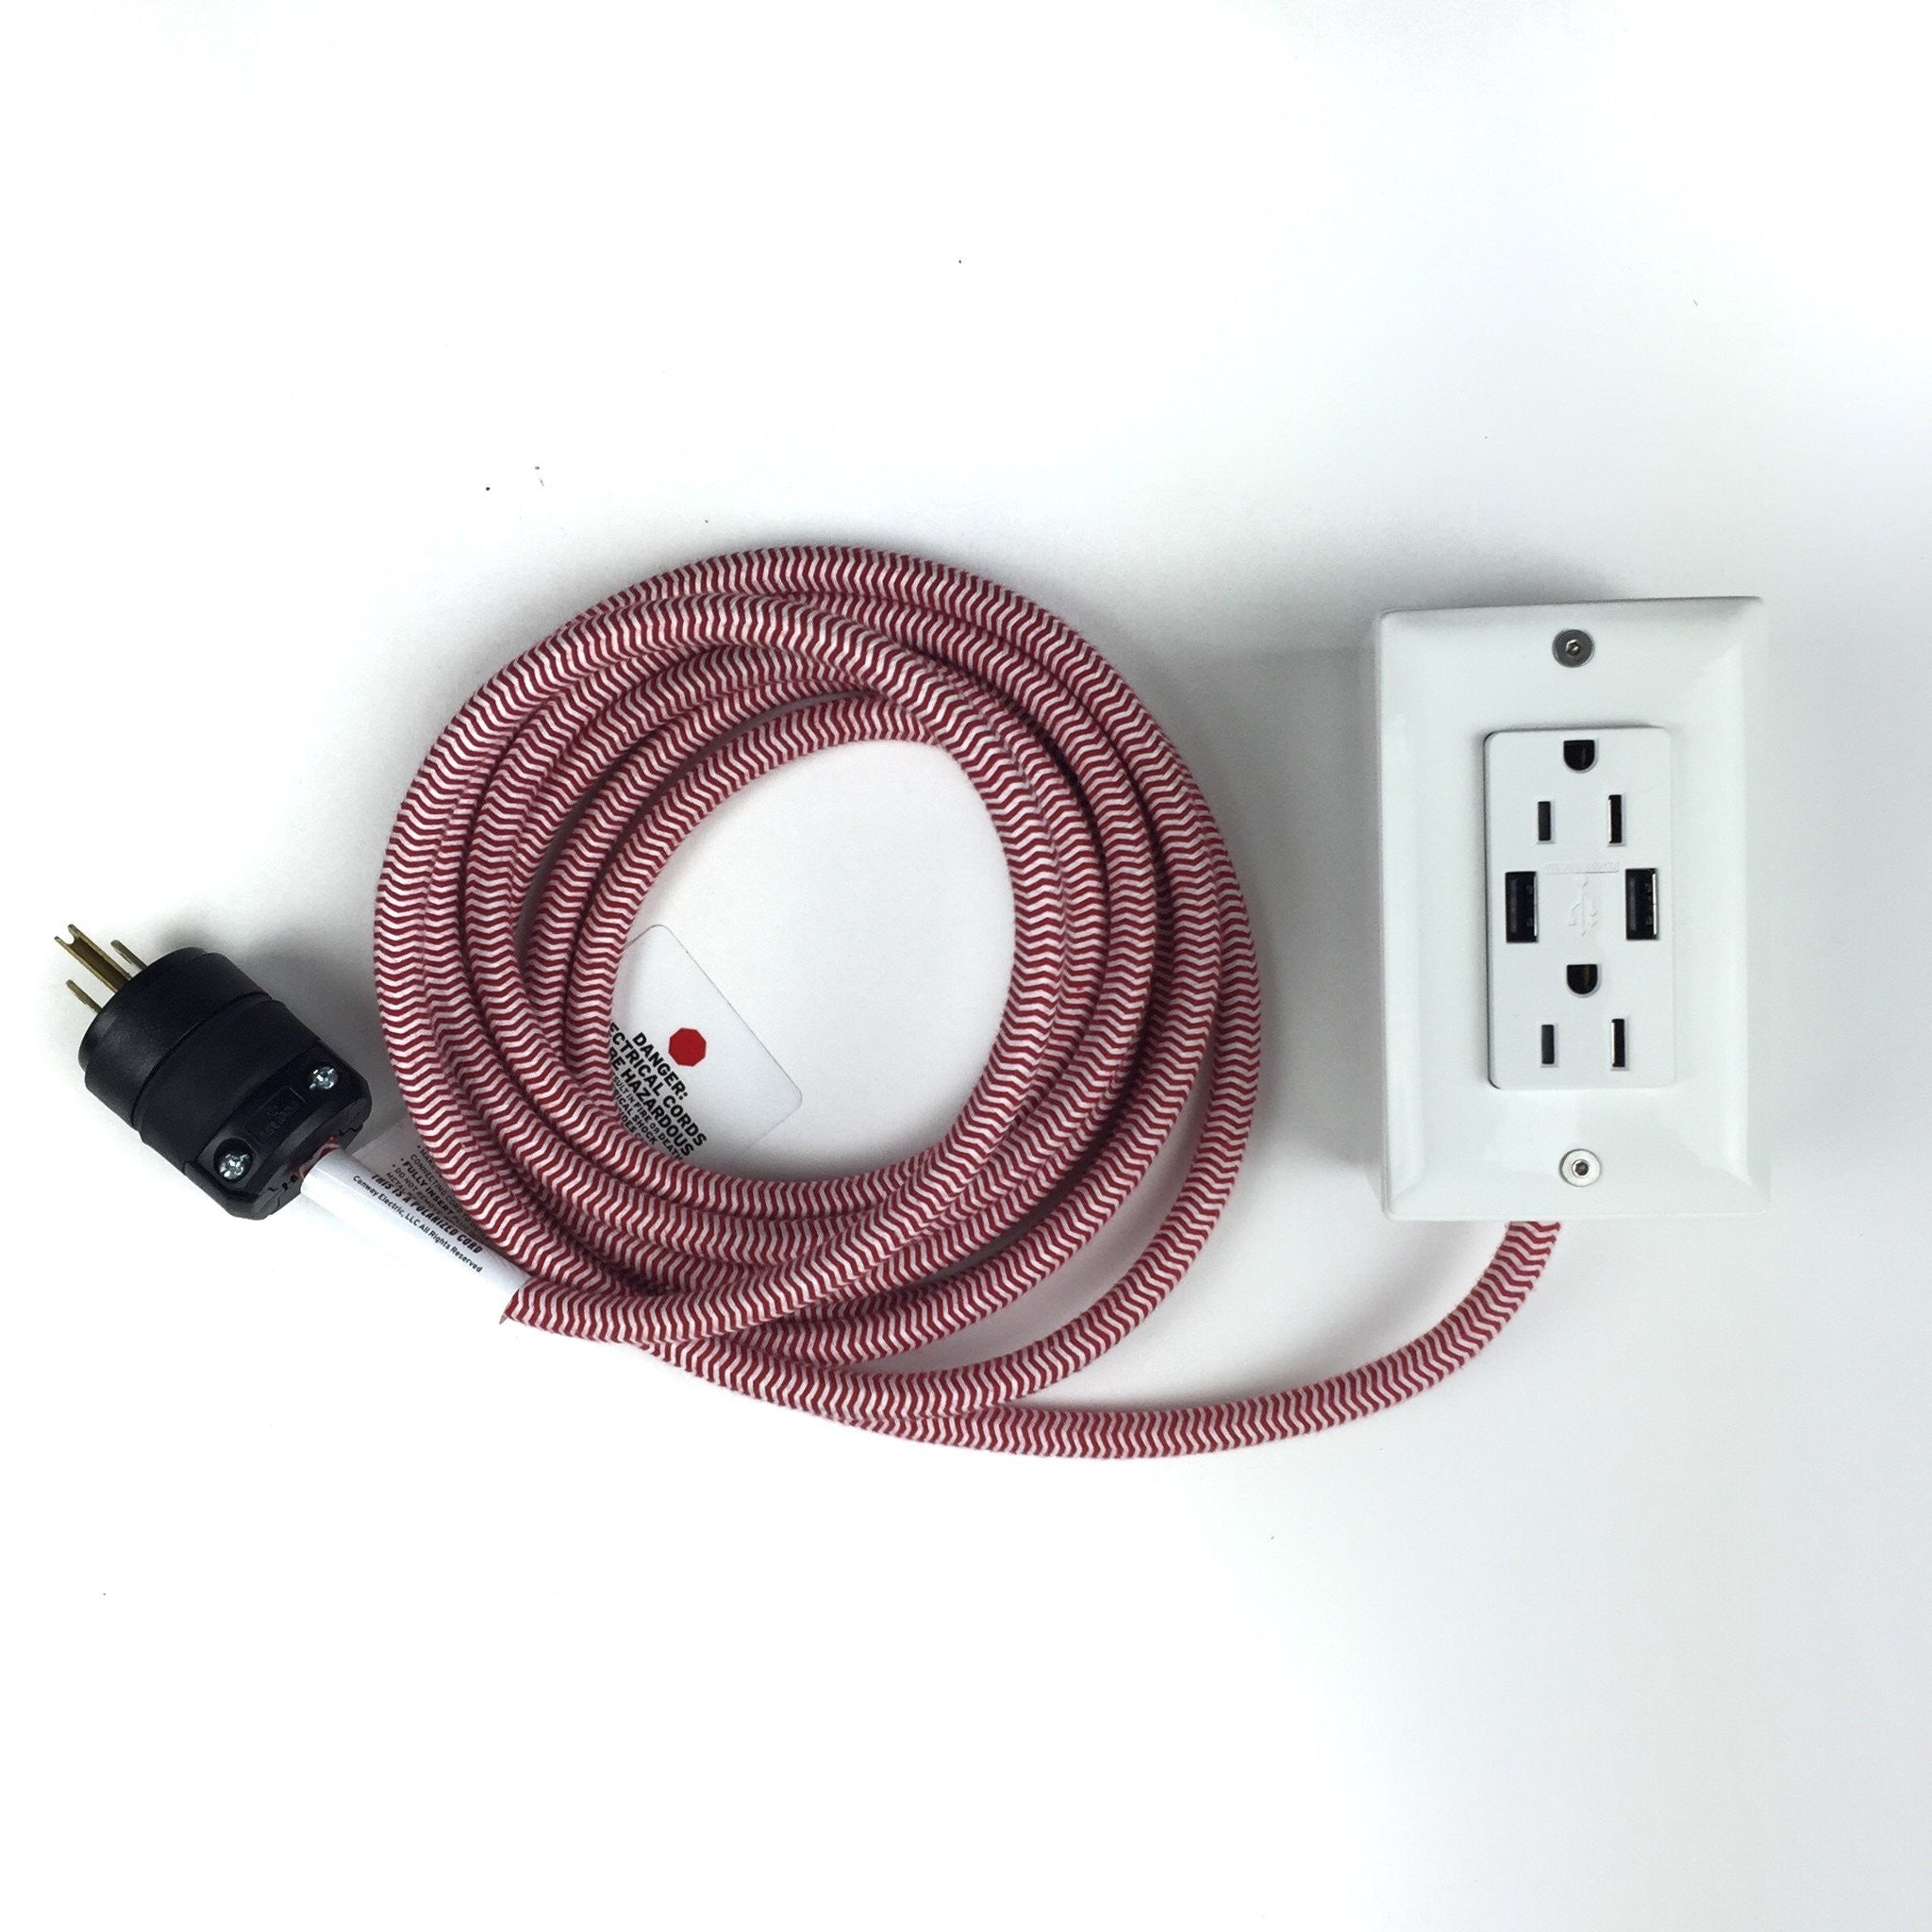 The First Smart Chip Extension Cord - 12' Extō Dual-USB, Dual-Outlet - Whitewash